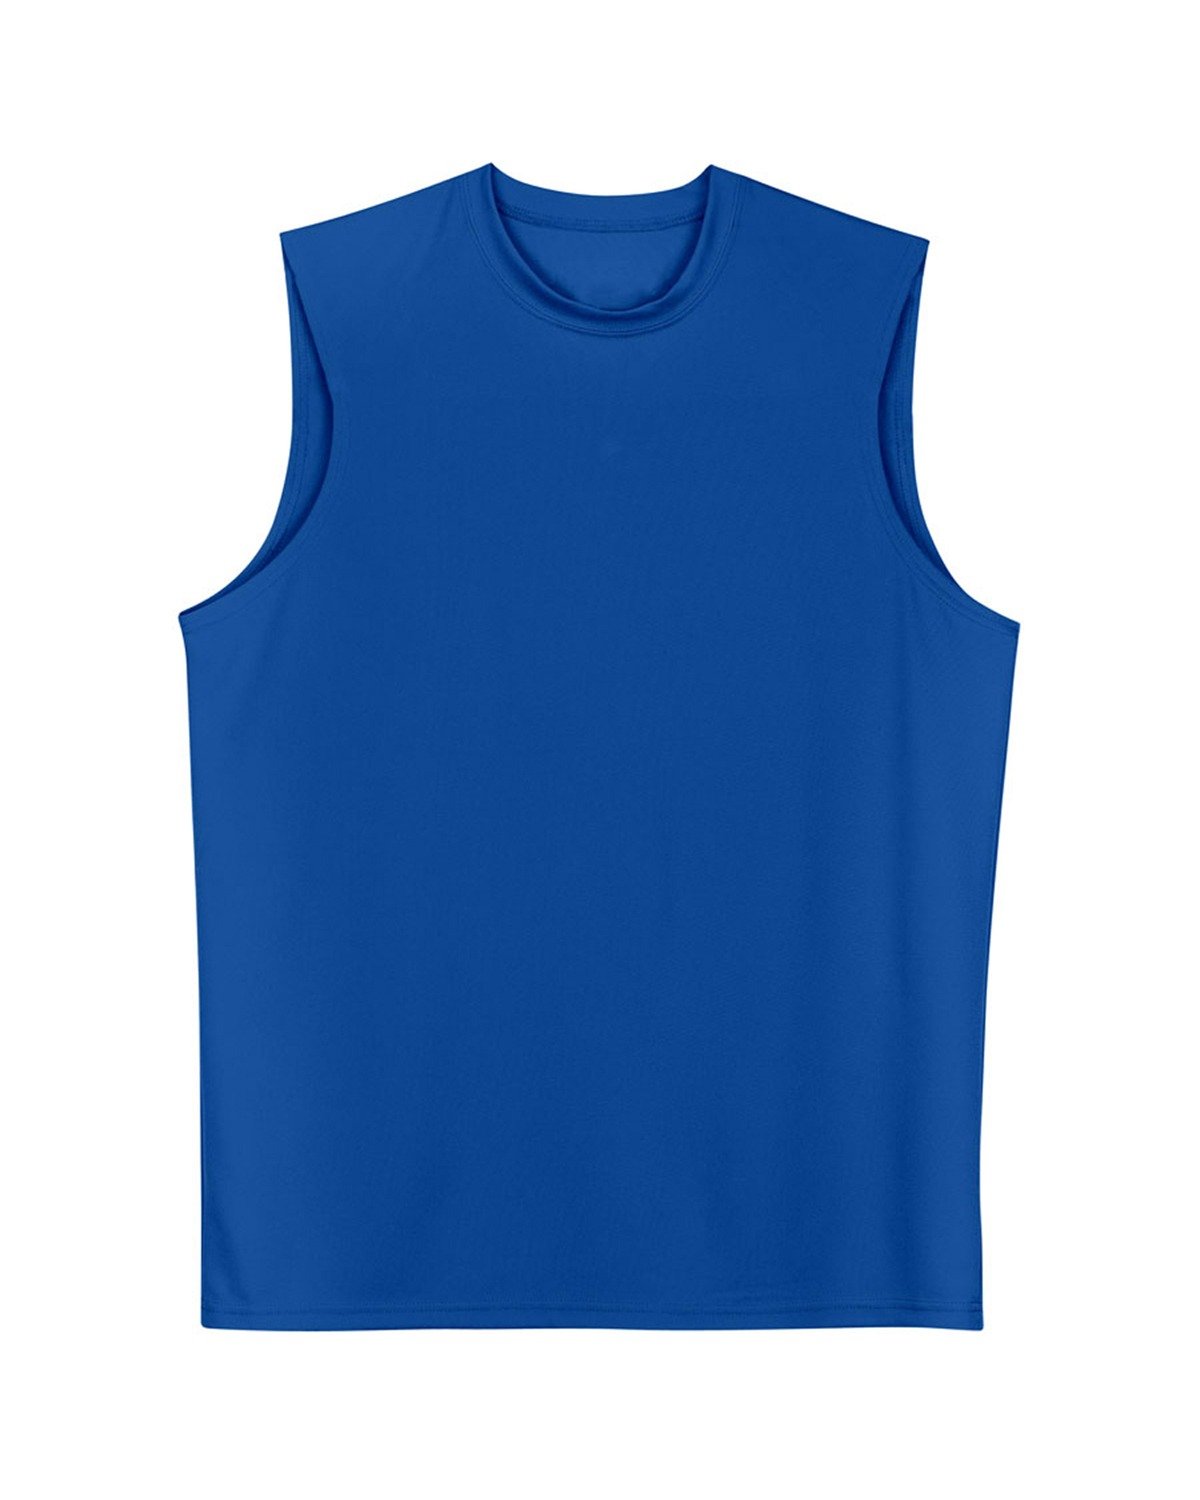 A4 Men's Cooling Performance Muscle T-Shirt ROYAL 